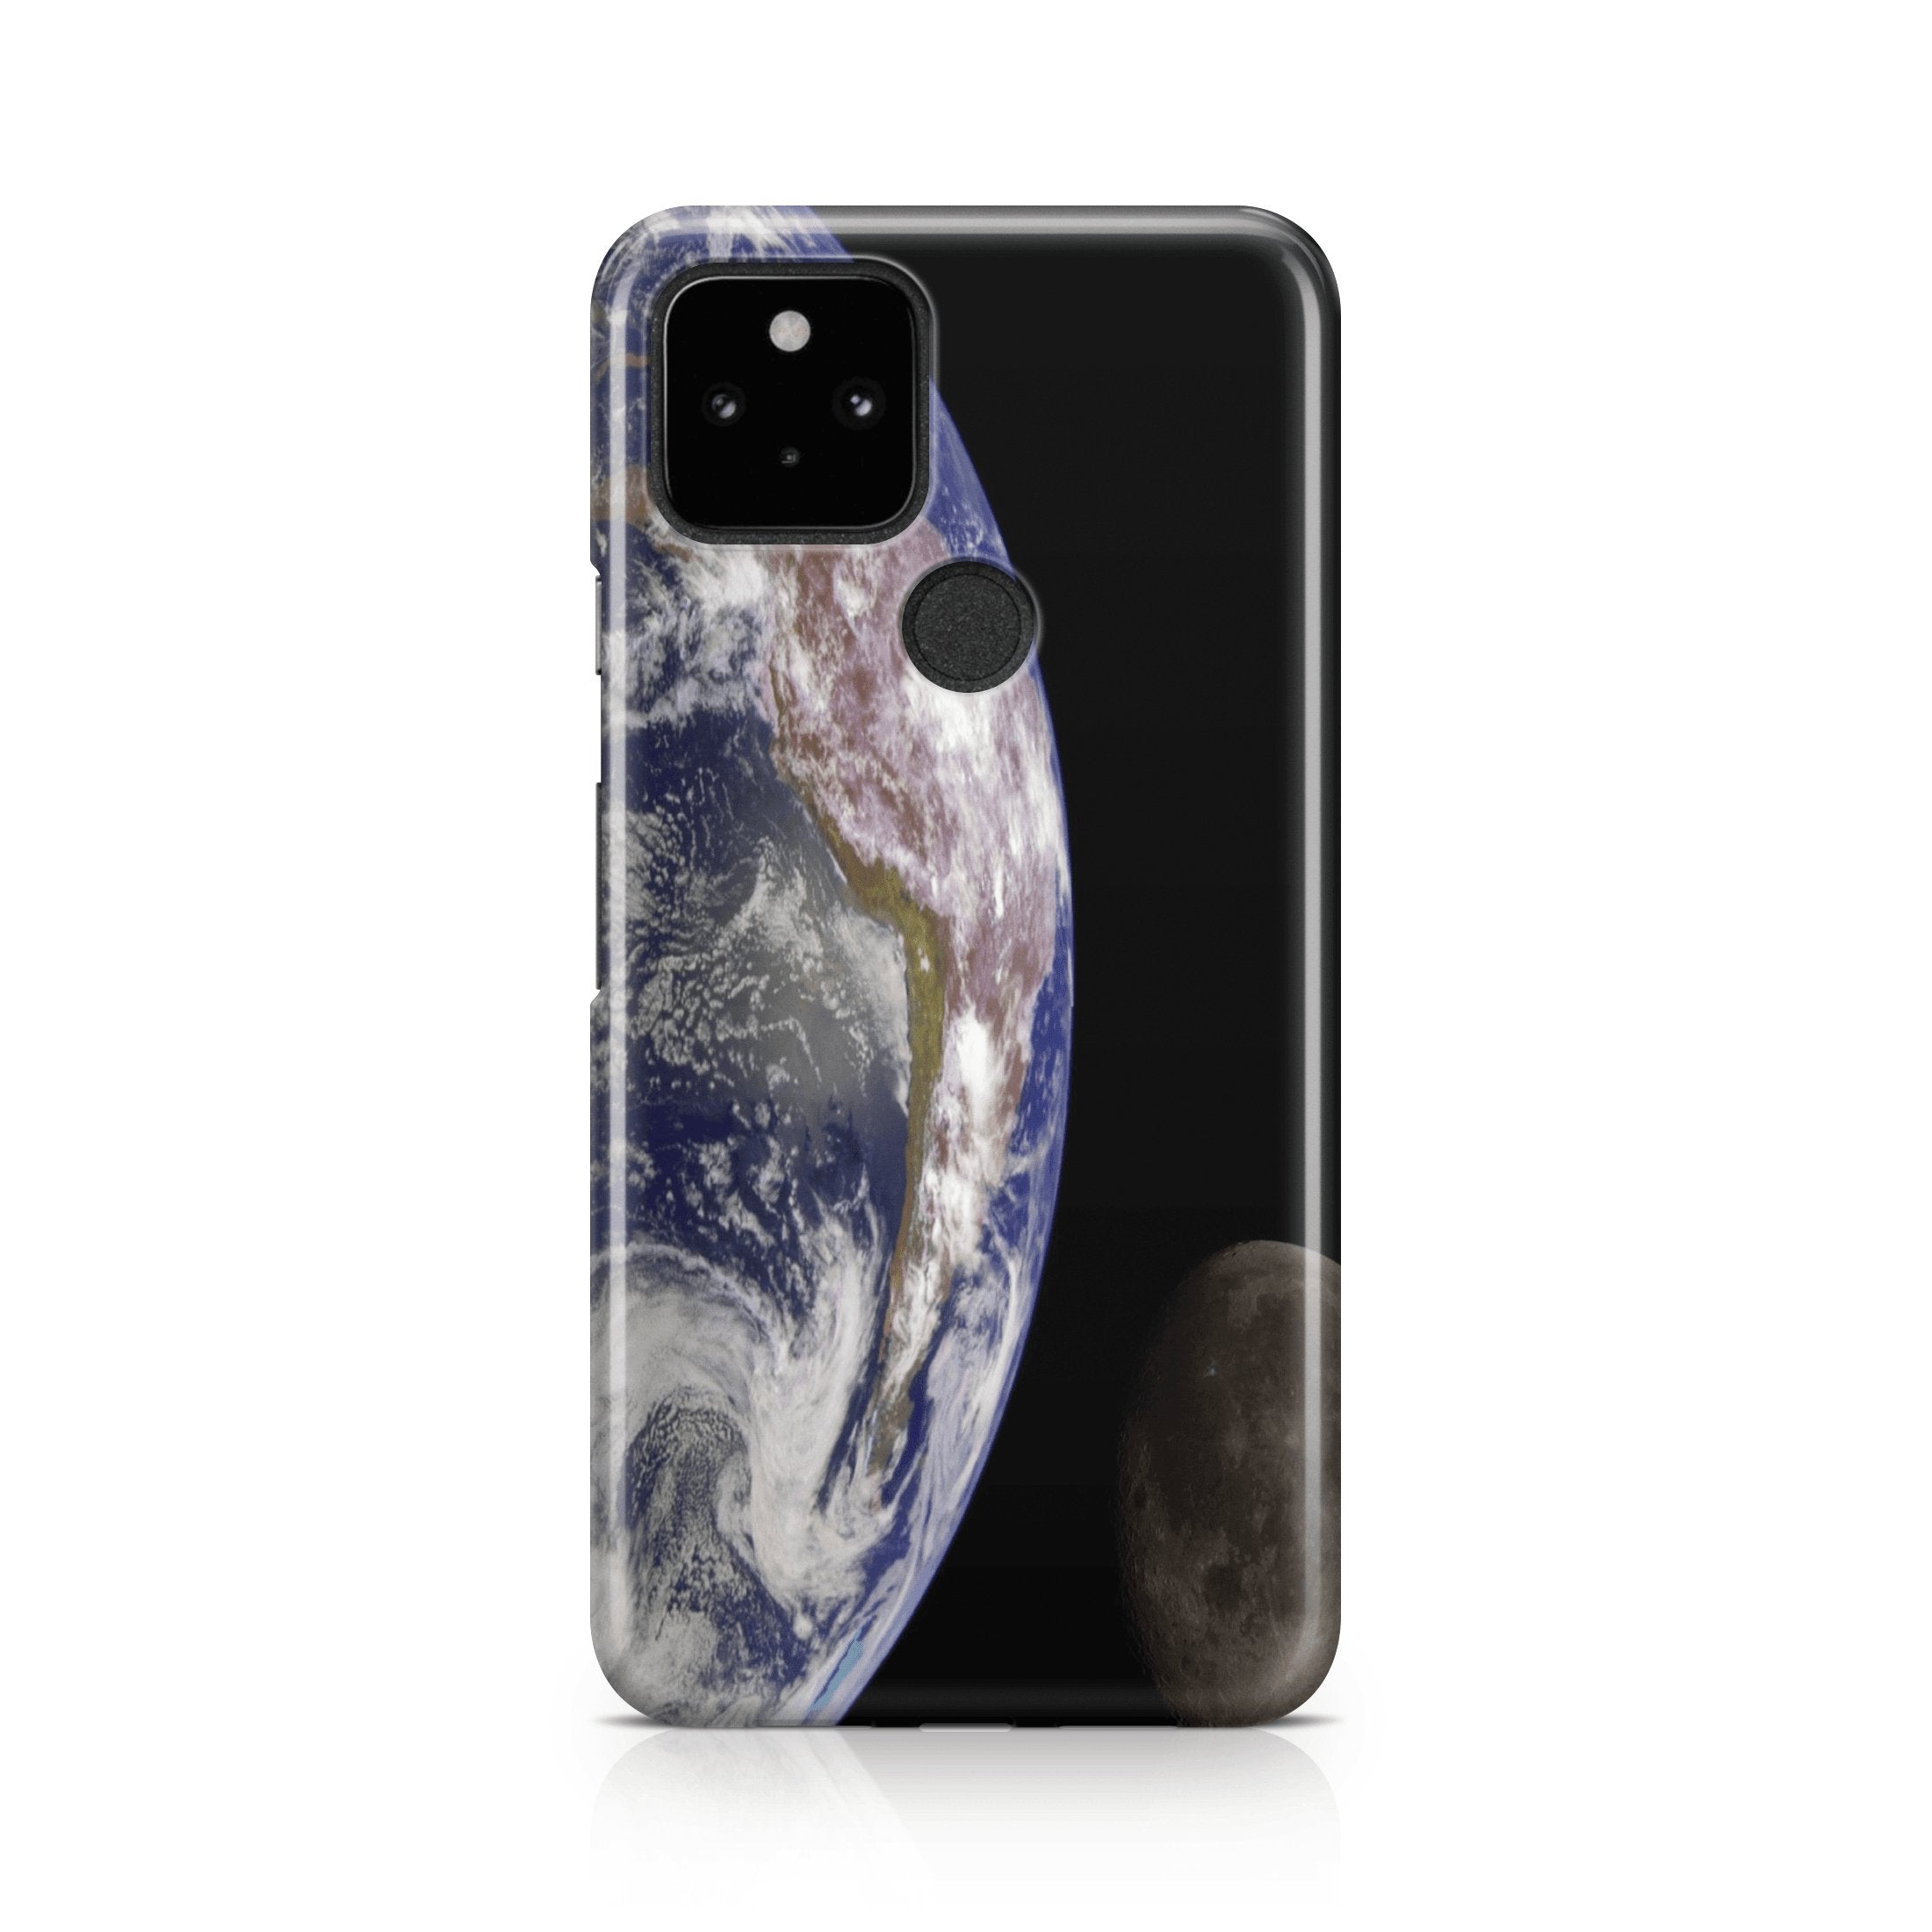 Earth Landscape - Google phone case designs by CaseSwagger